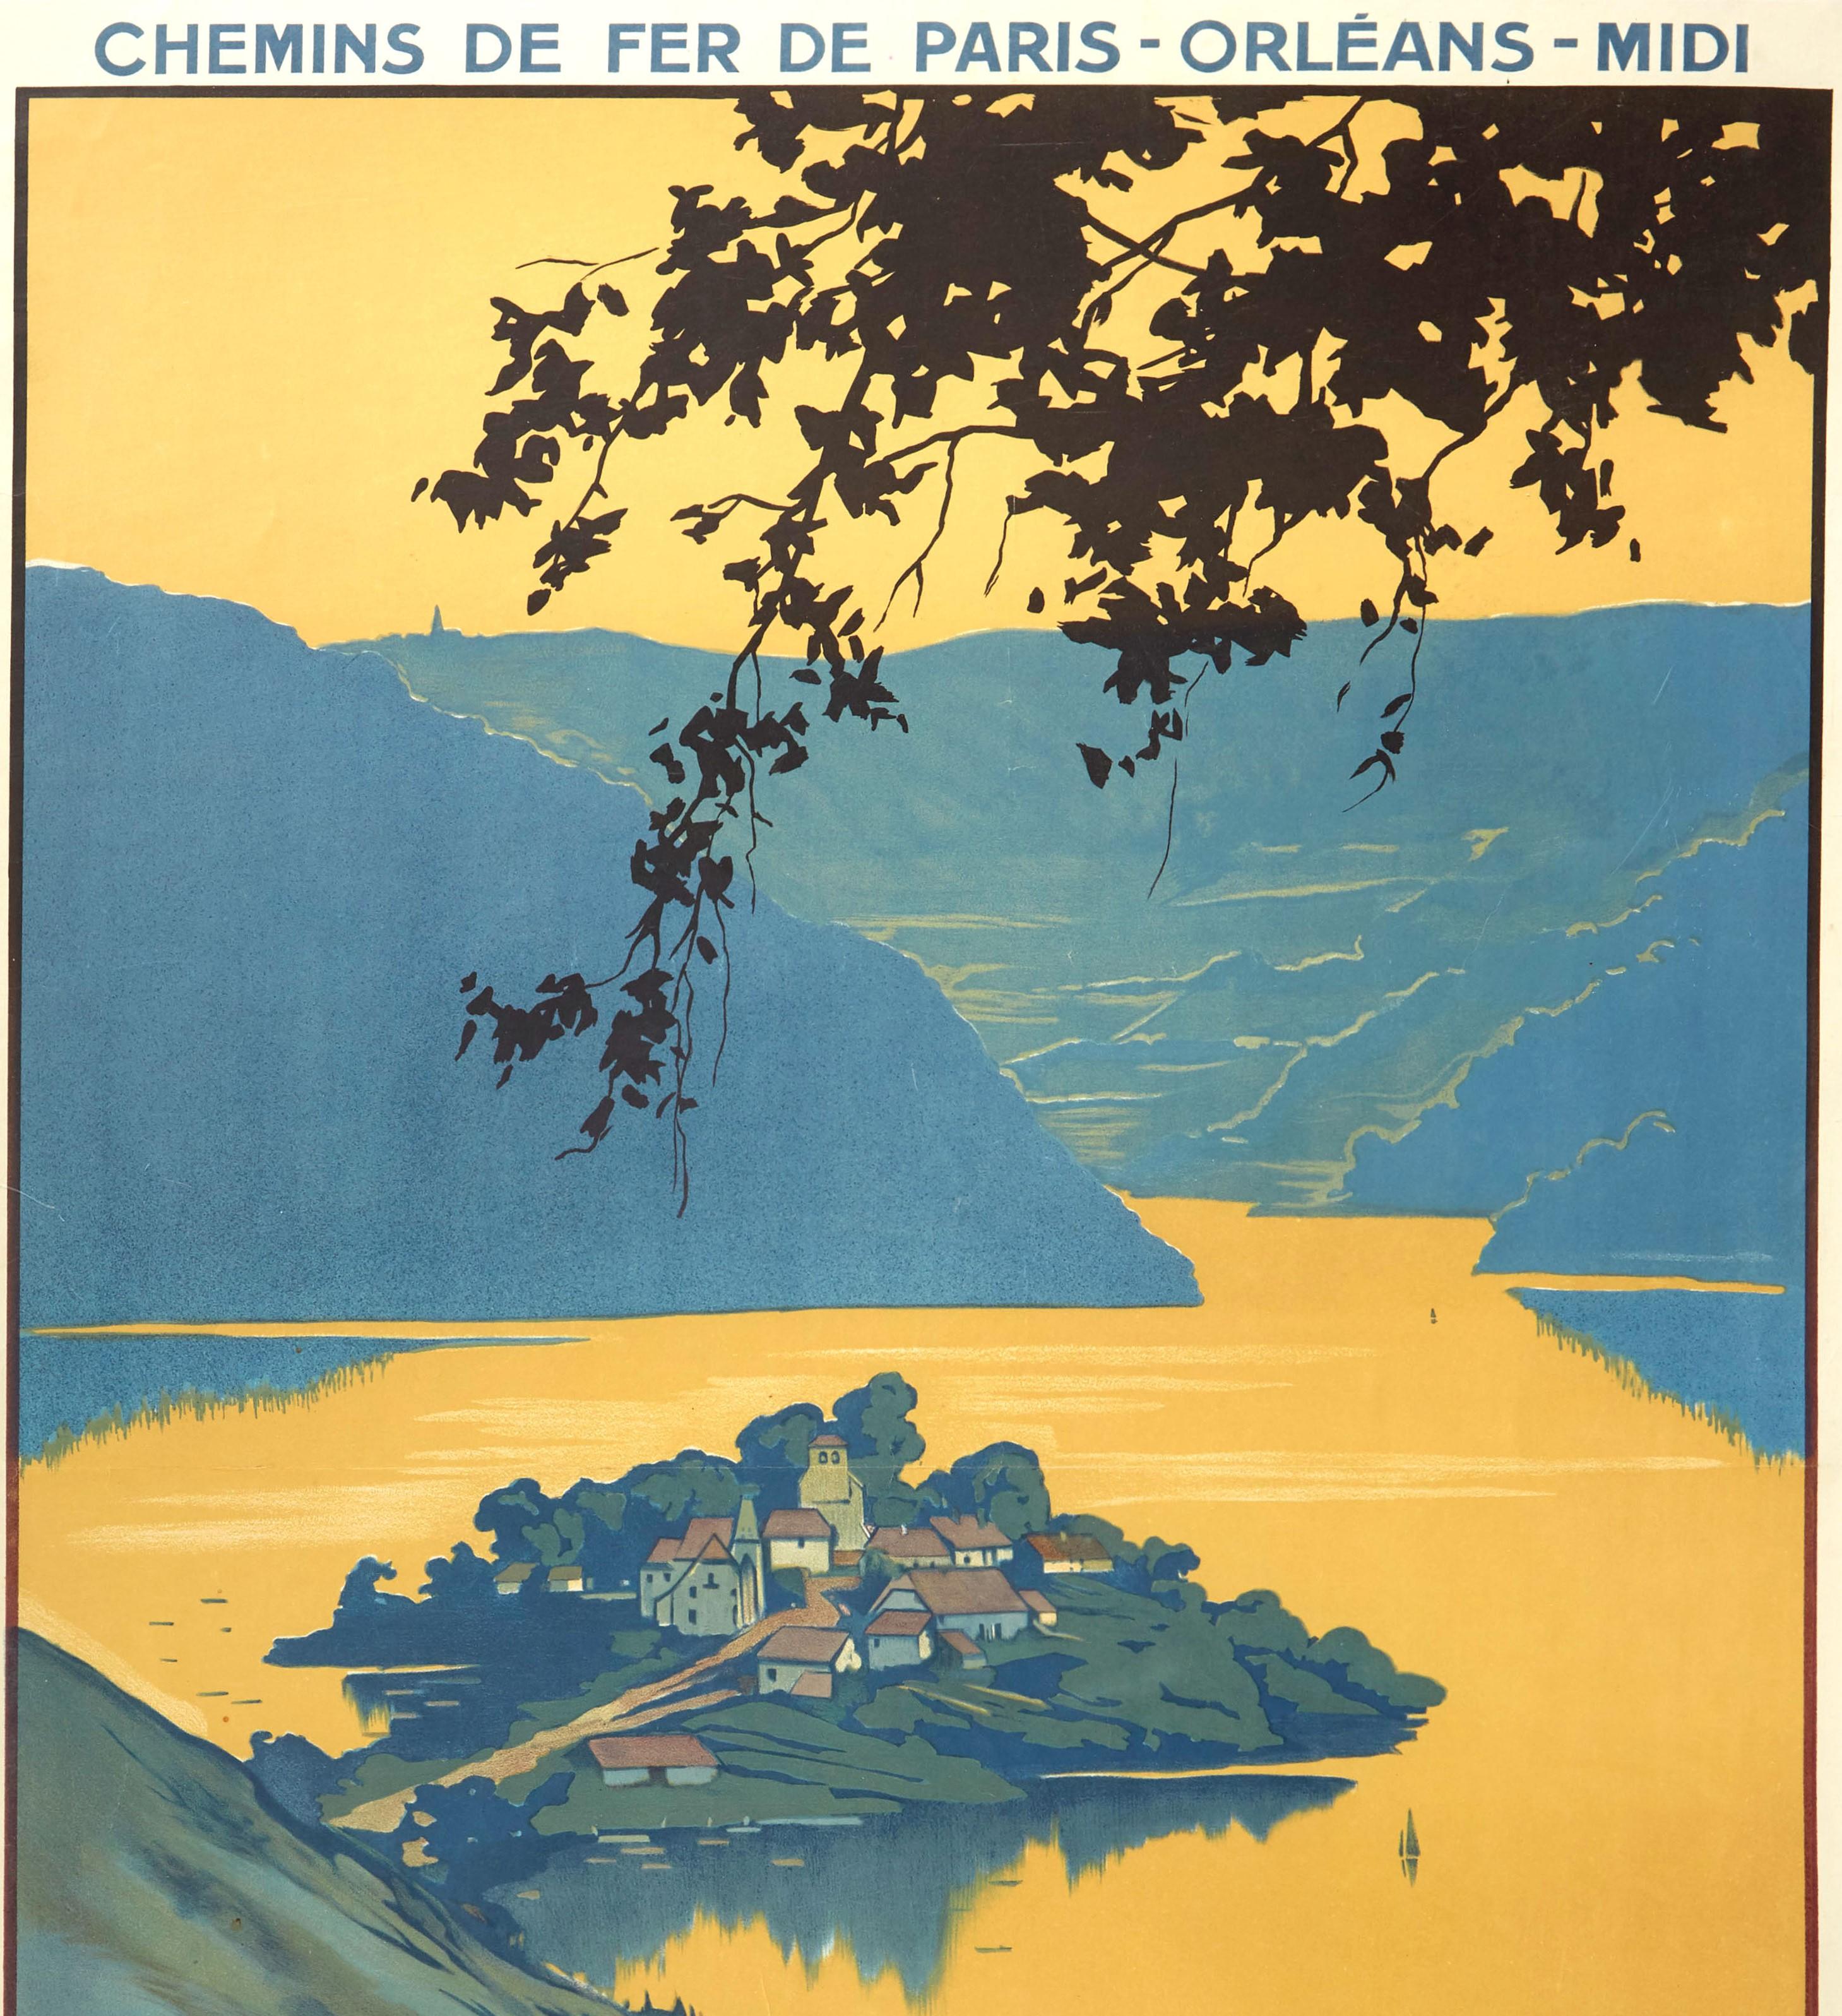 Original vintage French railway travel poster for Lac De Sarrans Aveyron Cantal Lot issued by the Chemins de Fer de Paris Orleans Midi featuring a stunning illustration by Charles-Jean Alo (1884-1969) depicting a quaint village on a stretch of land